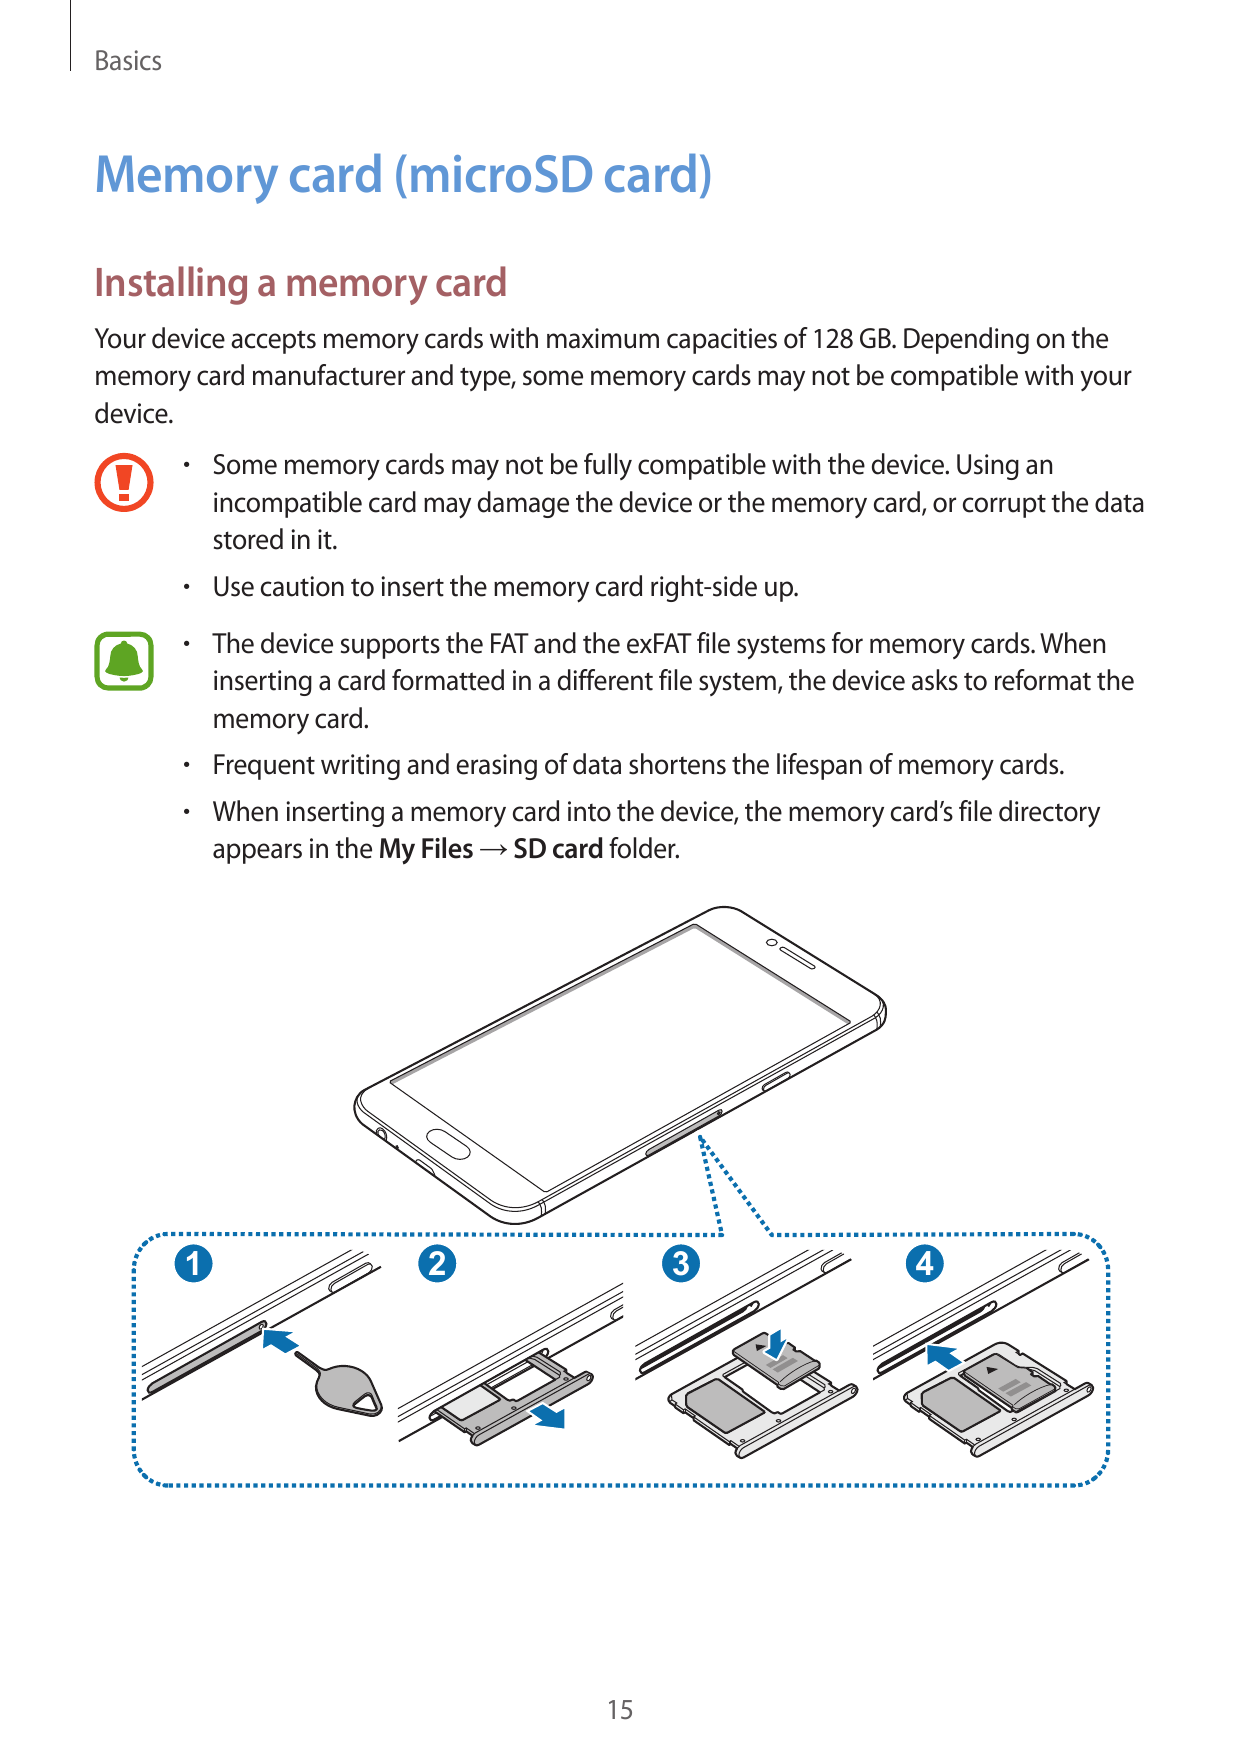 BasicsMemory card (microSD card)Installing a memory cardYour device accepts memory cards with maximum capacities of 128 GB. Depe